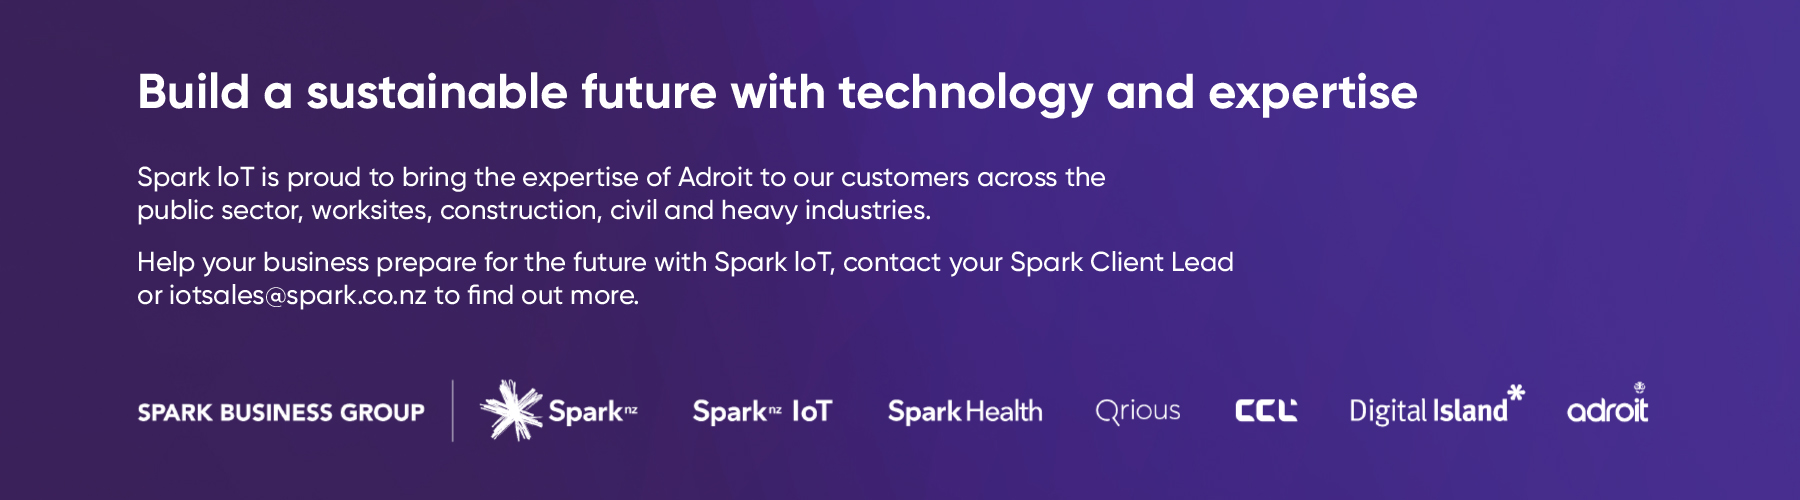 Spark Business Group of companies